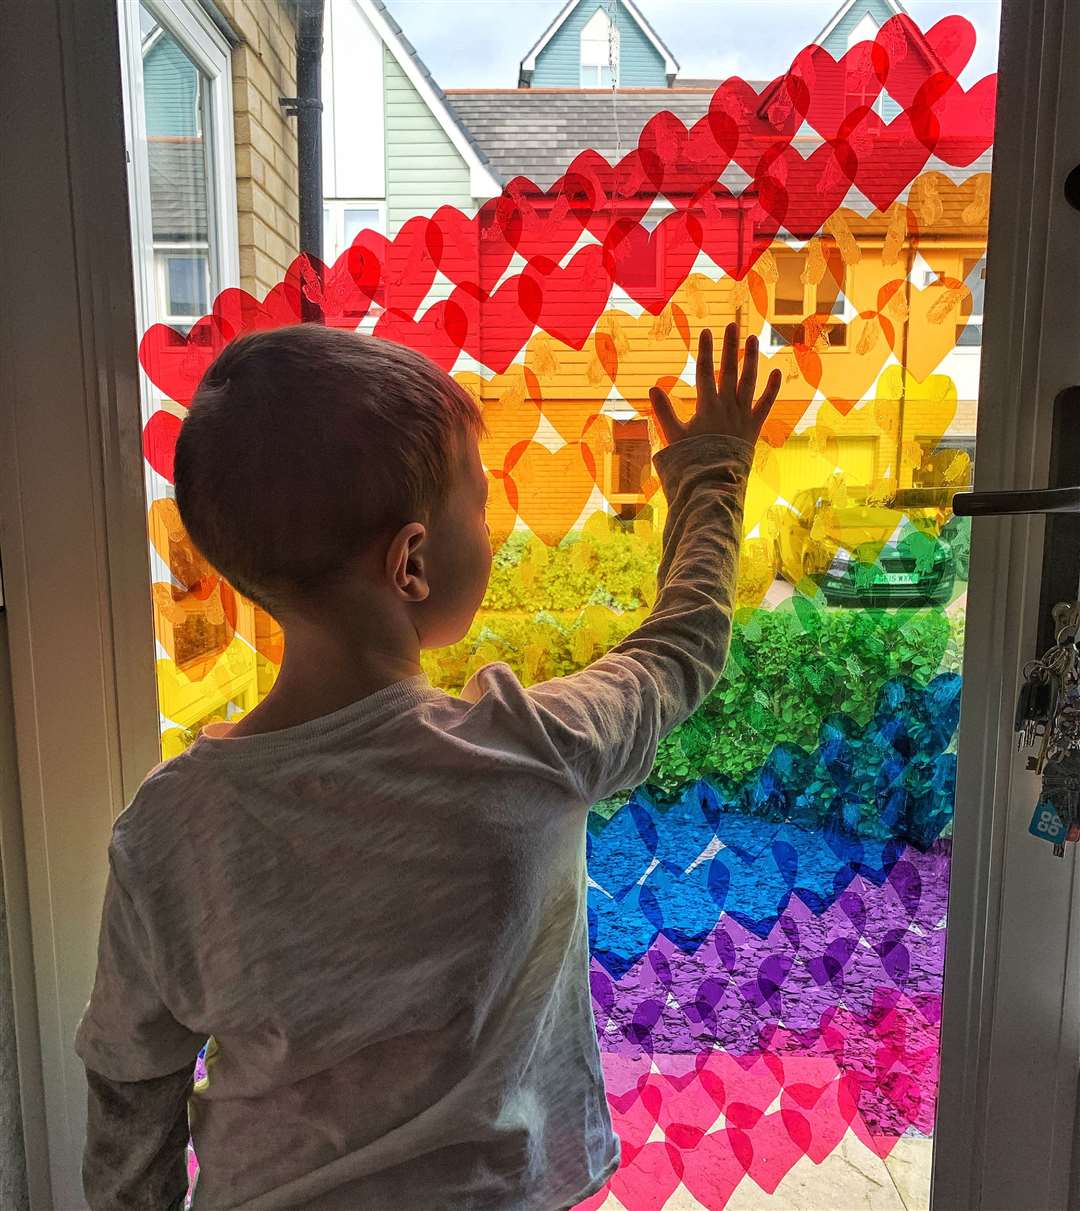 To brighten the days of NHS and essential workers, families flooded their windows with rainbows. This one is from Harrison, 7.